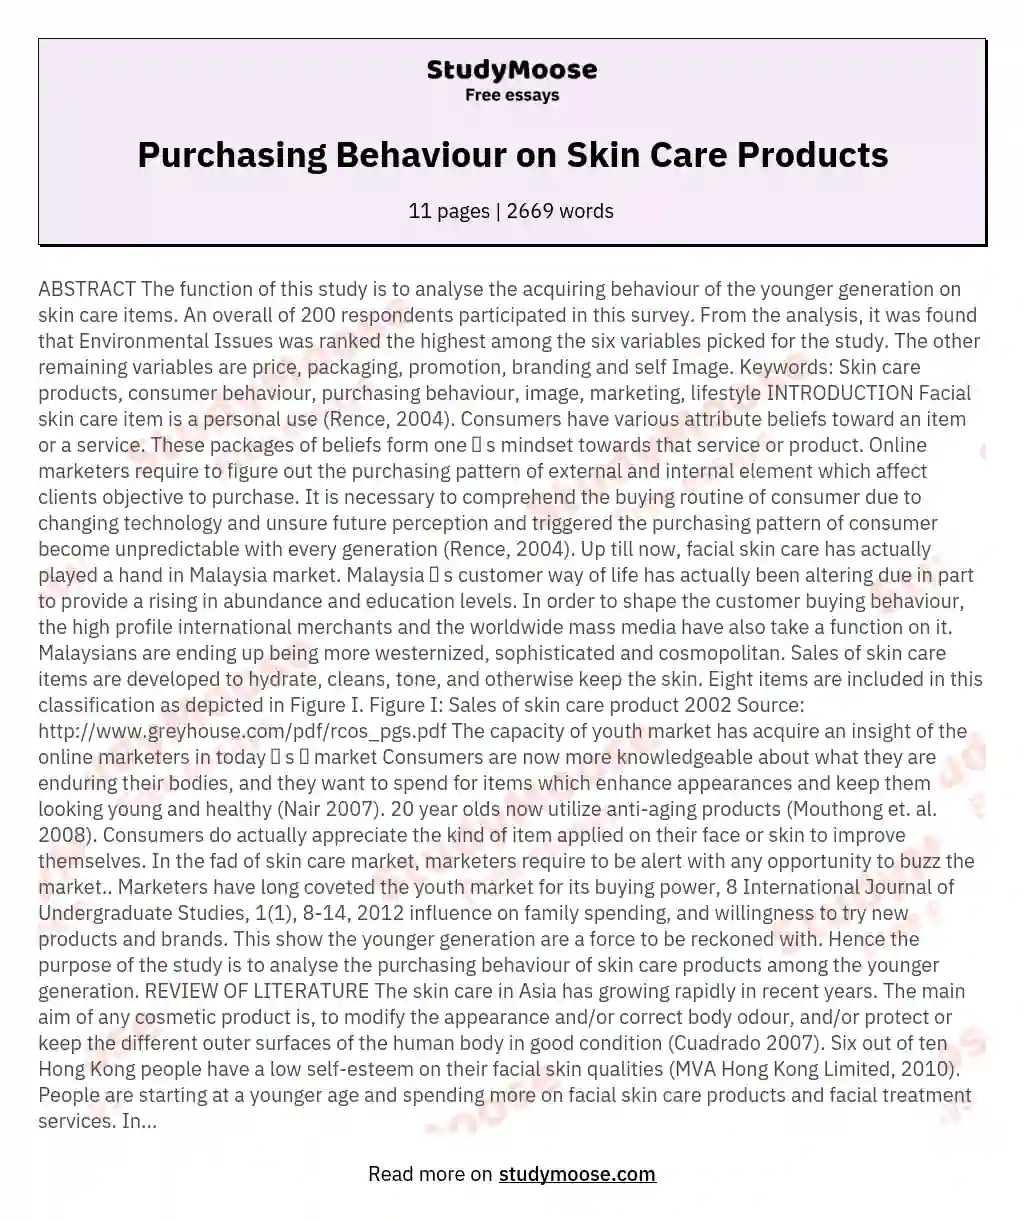 Purchasing Behaviour on Skin Care Products essay